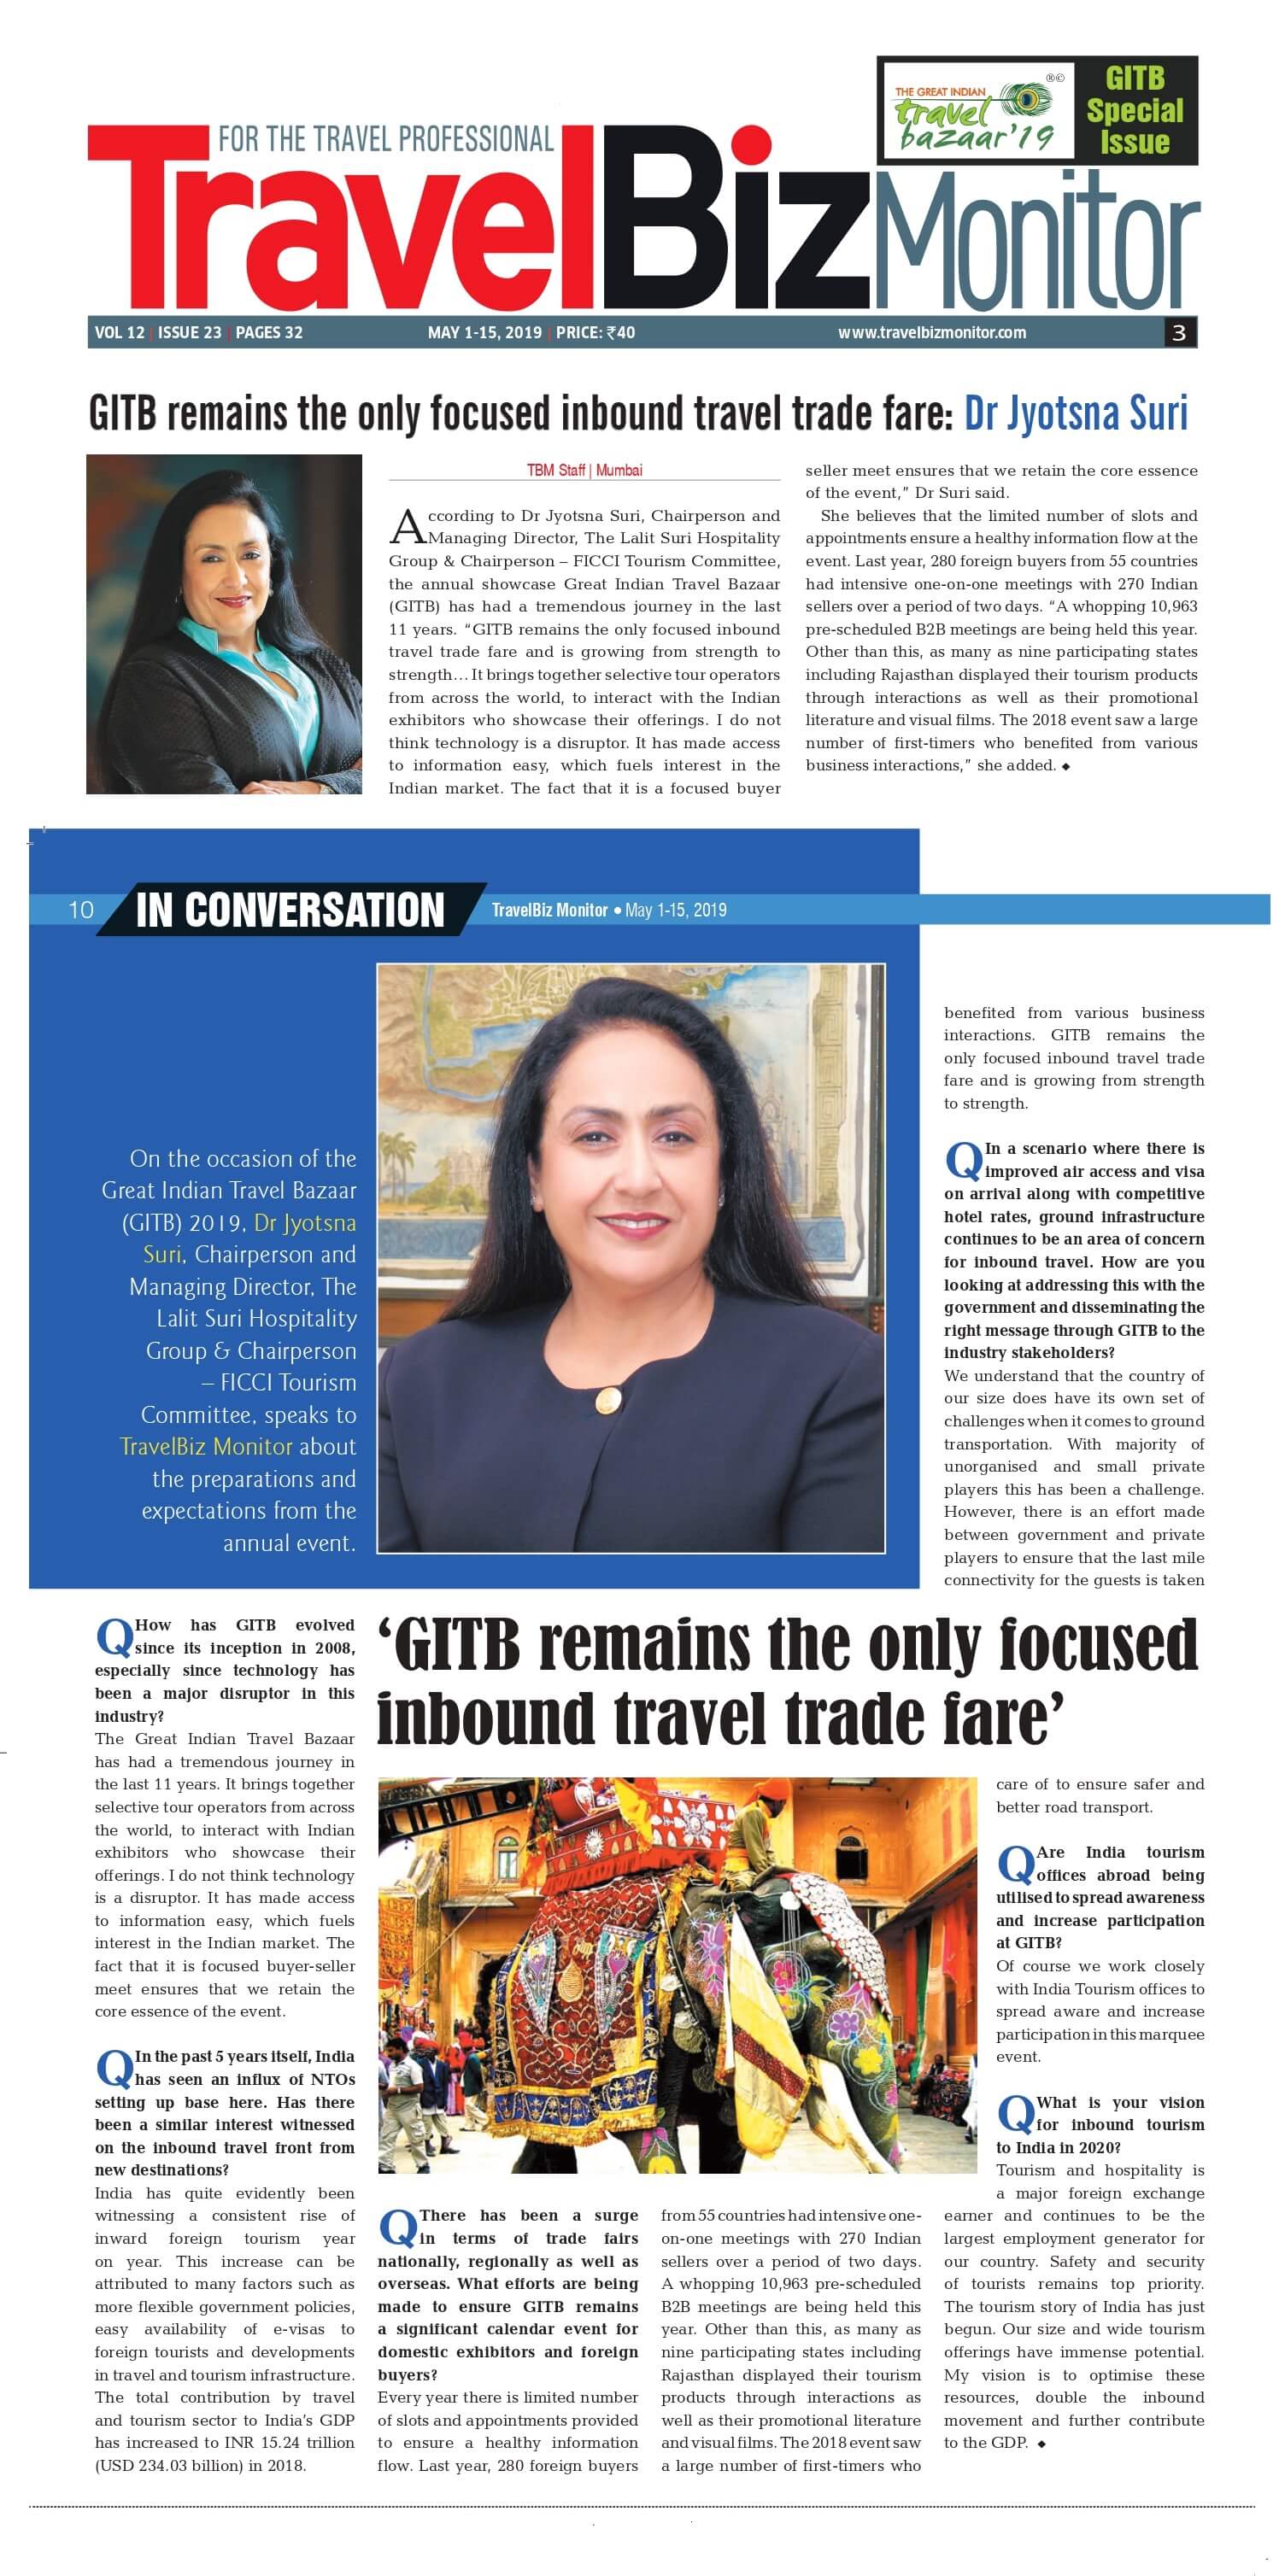 GITB remains the only focused inbound travel trade fare: Dr. Jyotsna Suri